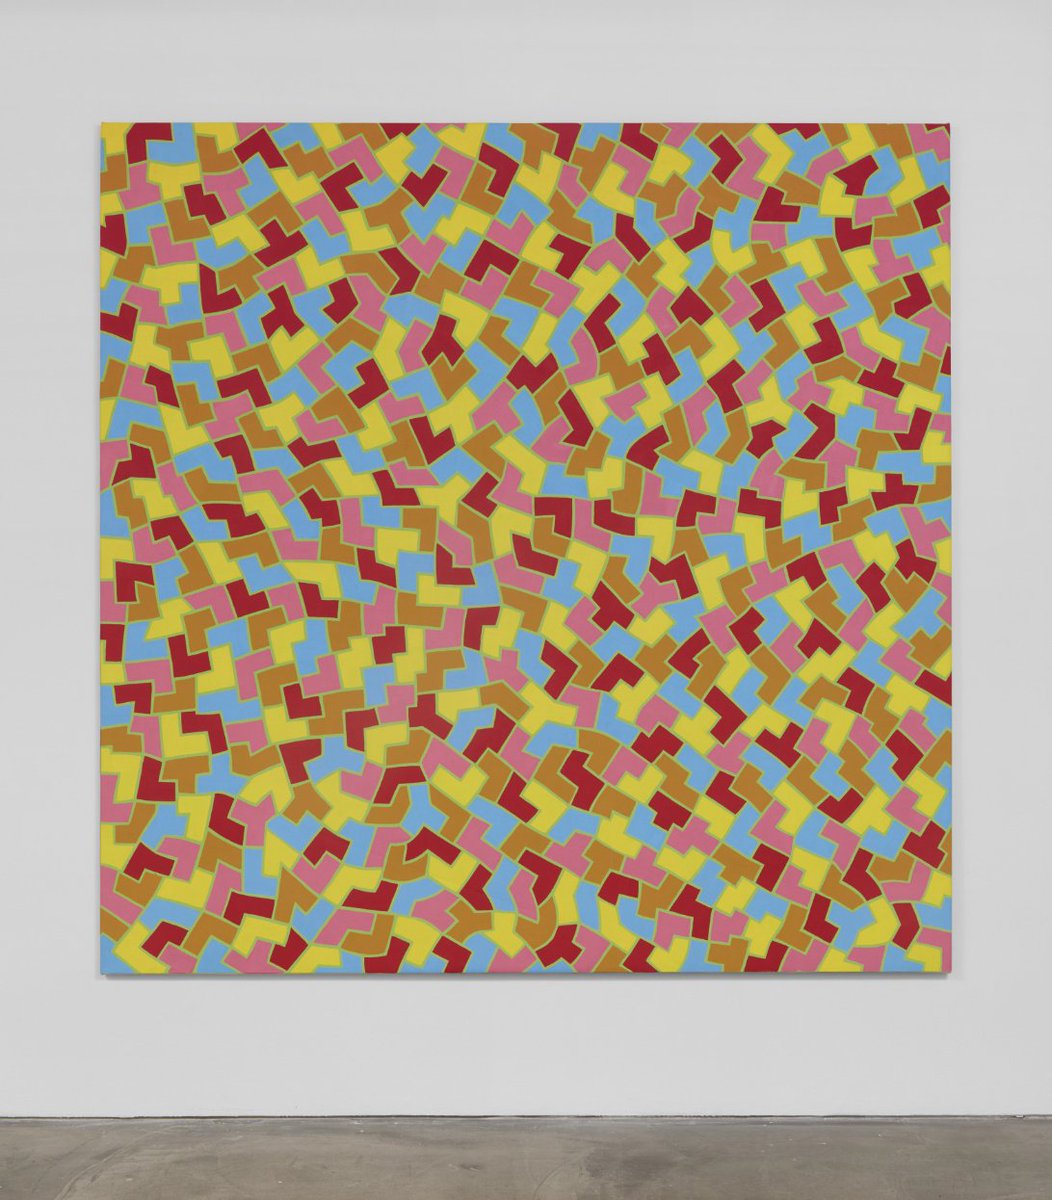 ‘Red Yellow Blue Pink Brown.’ #Painting by Rosemarie Castoro (1965) #art